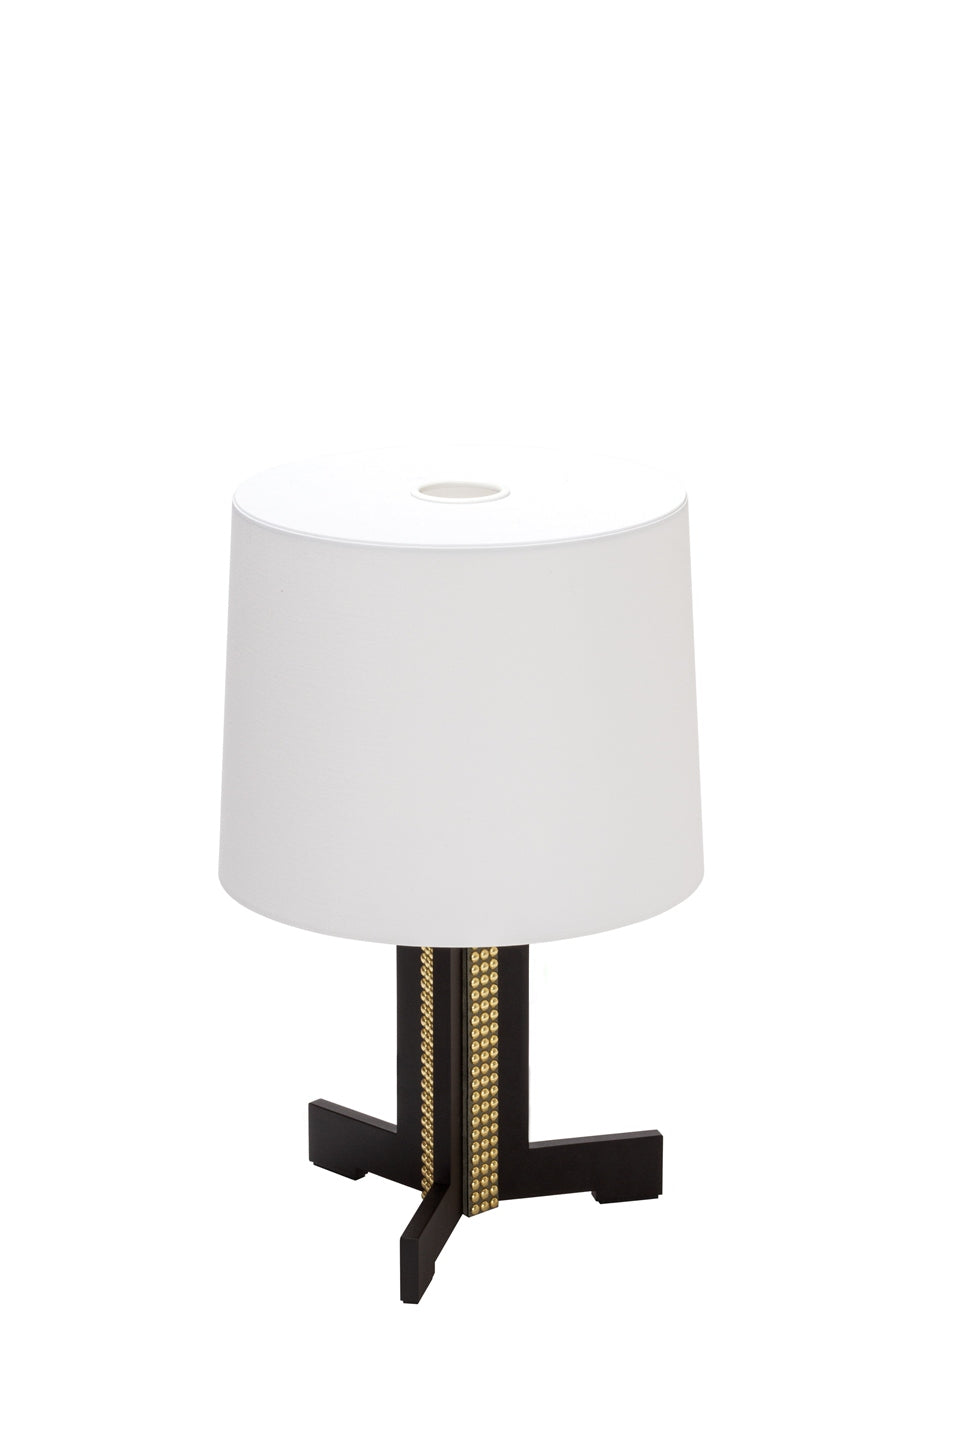 Giobagnara x Stéphane Parmentier Rhapsody Leather-Covered Table Lamp | A Blend of Tradition and Contemporary Design | Features Golden Tacks and Sumptuous Leather | Inspired by Craftsmanship of the Late 1800s | Seamlessly Merges Classic and Modern Styles | Available at 2Jour Concierge, #1 luxury high-end gift & lifestyle shop